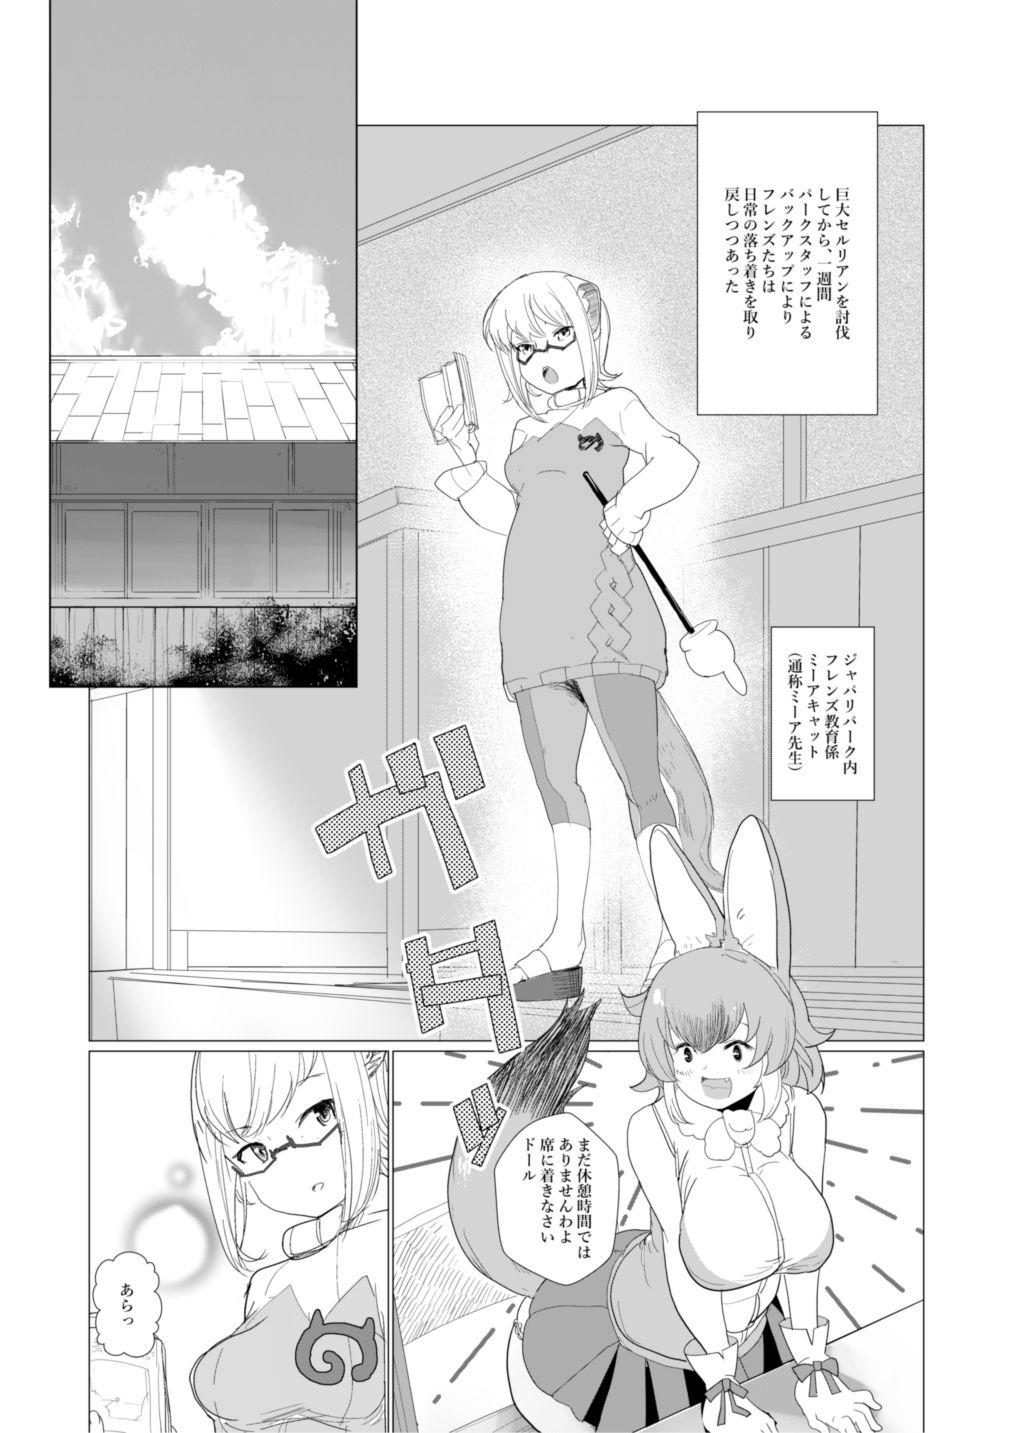 Sex Party 隊長さんのおちんちんは私専用ですわ。 - Kemono friends Teenpussy - Page 2